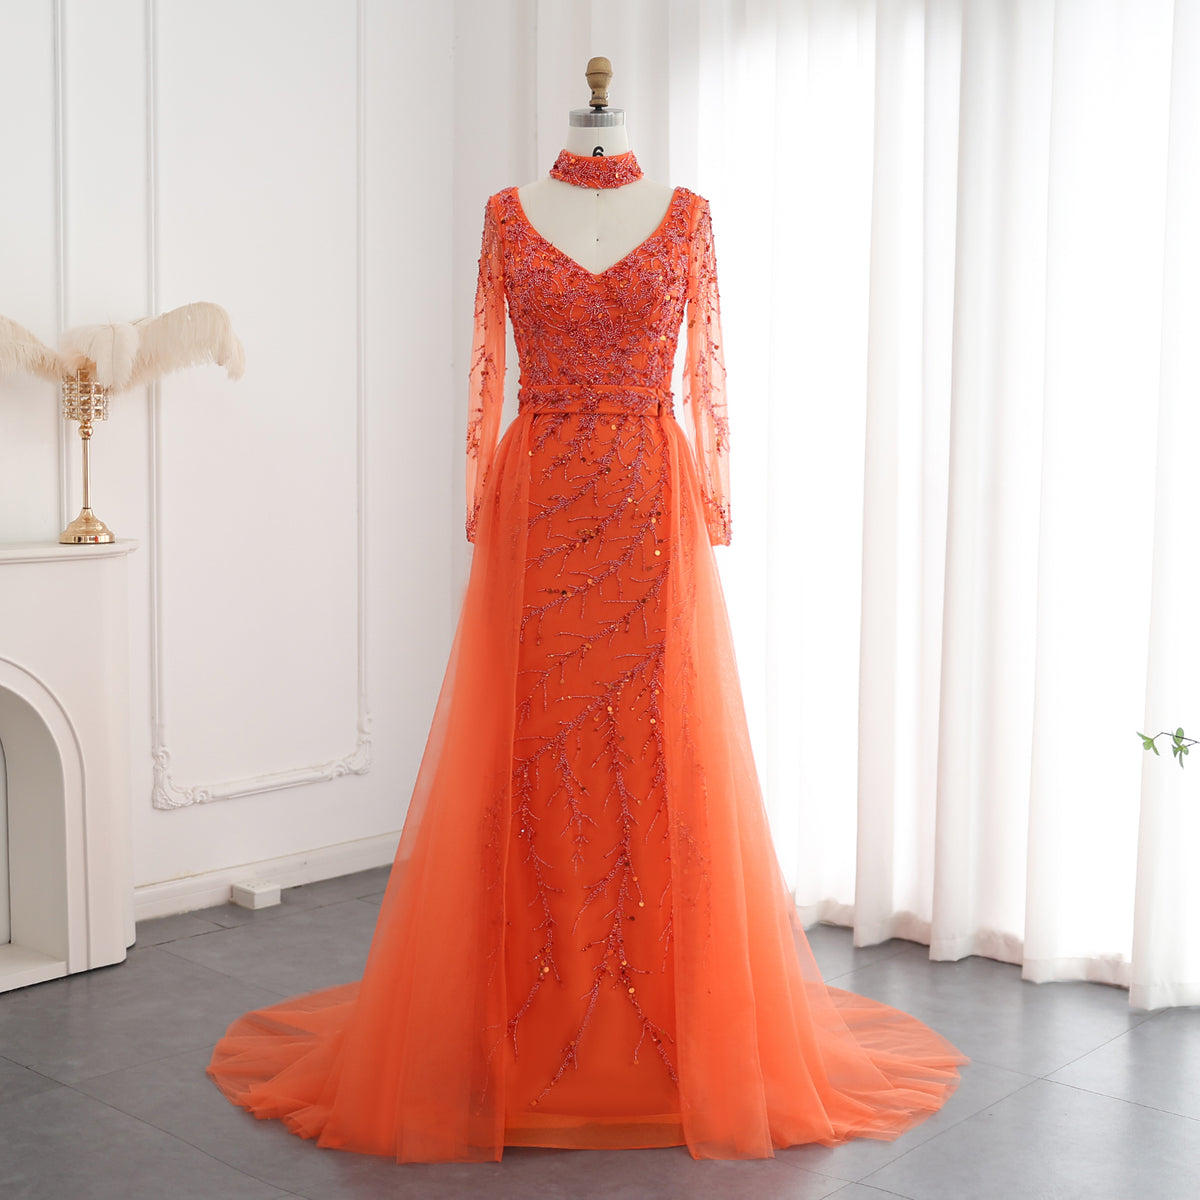 Sharon Said Luxury Beaded Mermaid Orange Evening Dress with Overskirt Light Blue Long Sleeves Women Wedding Party Gowns SS222